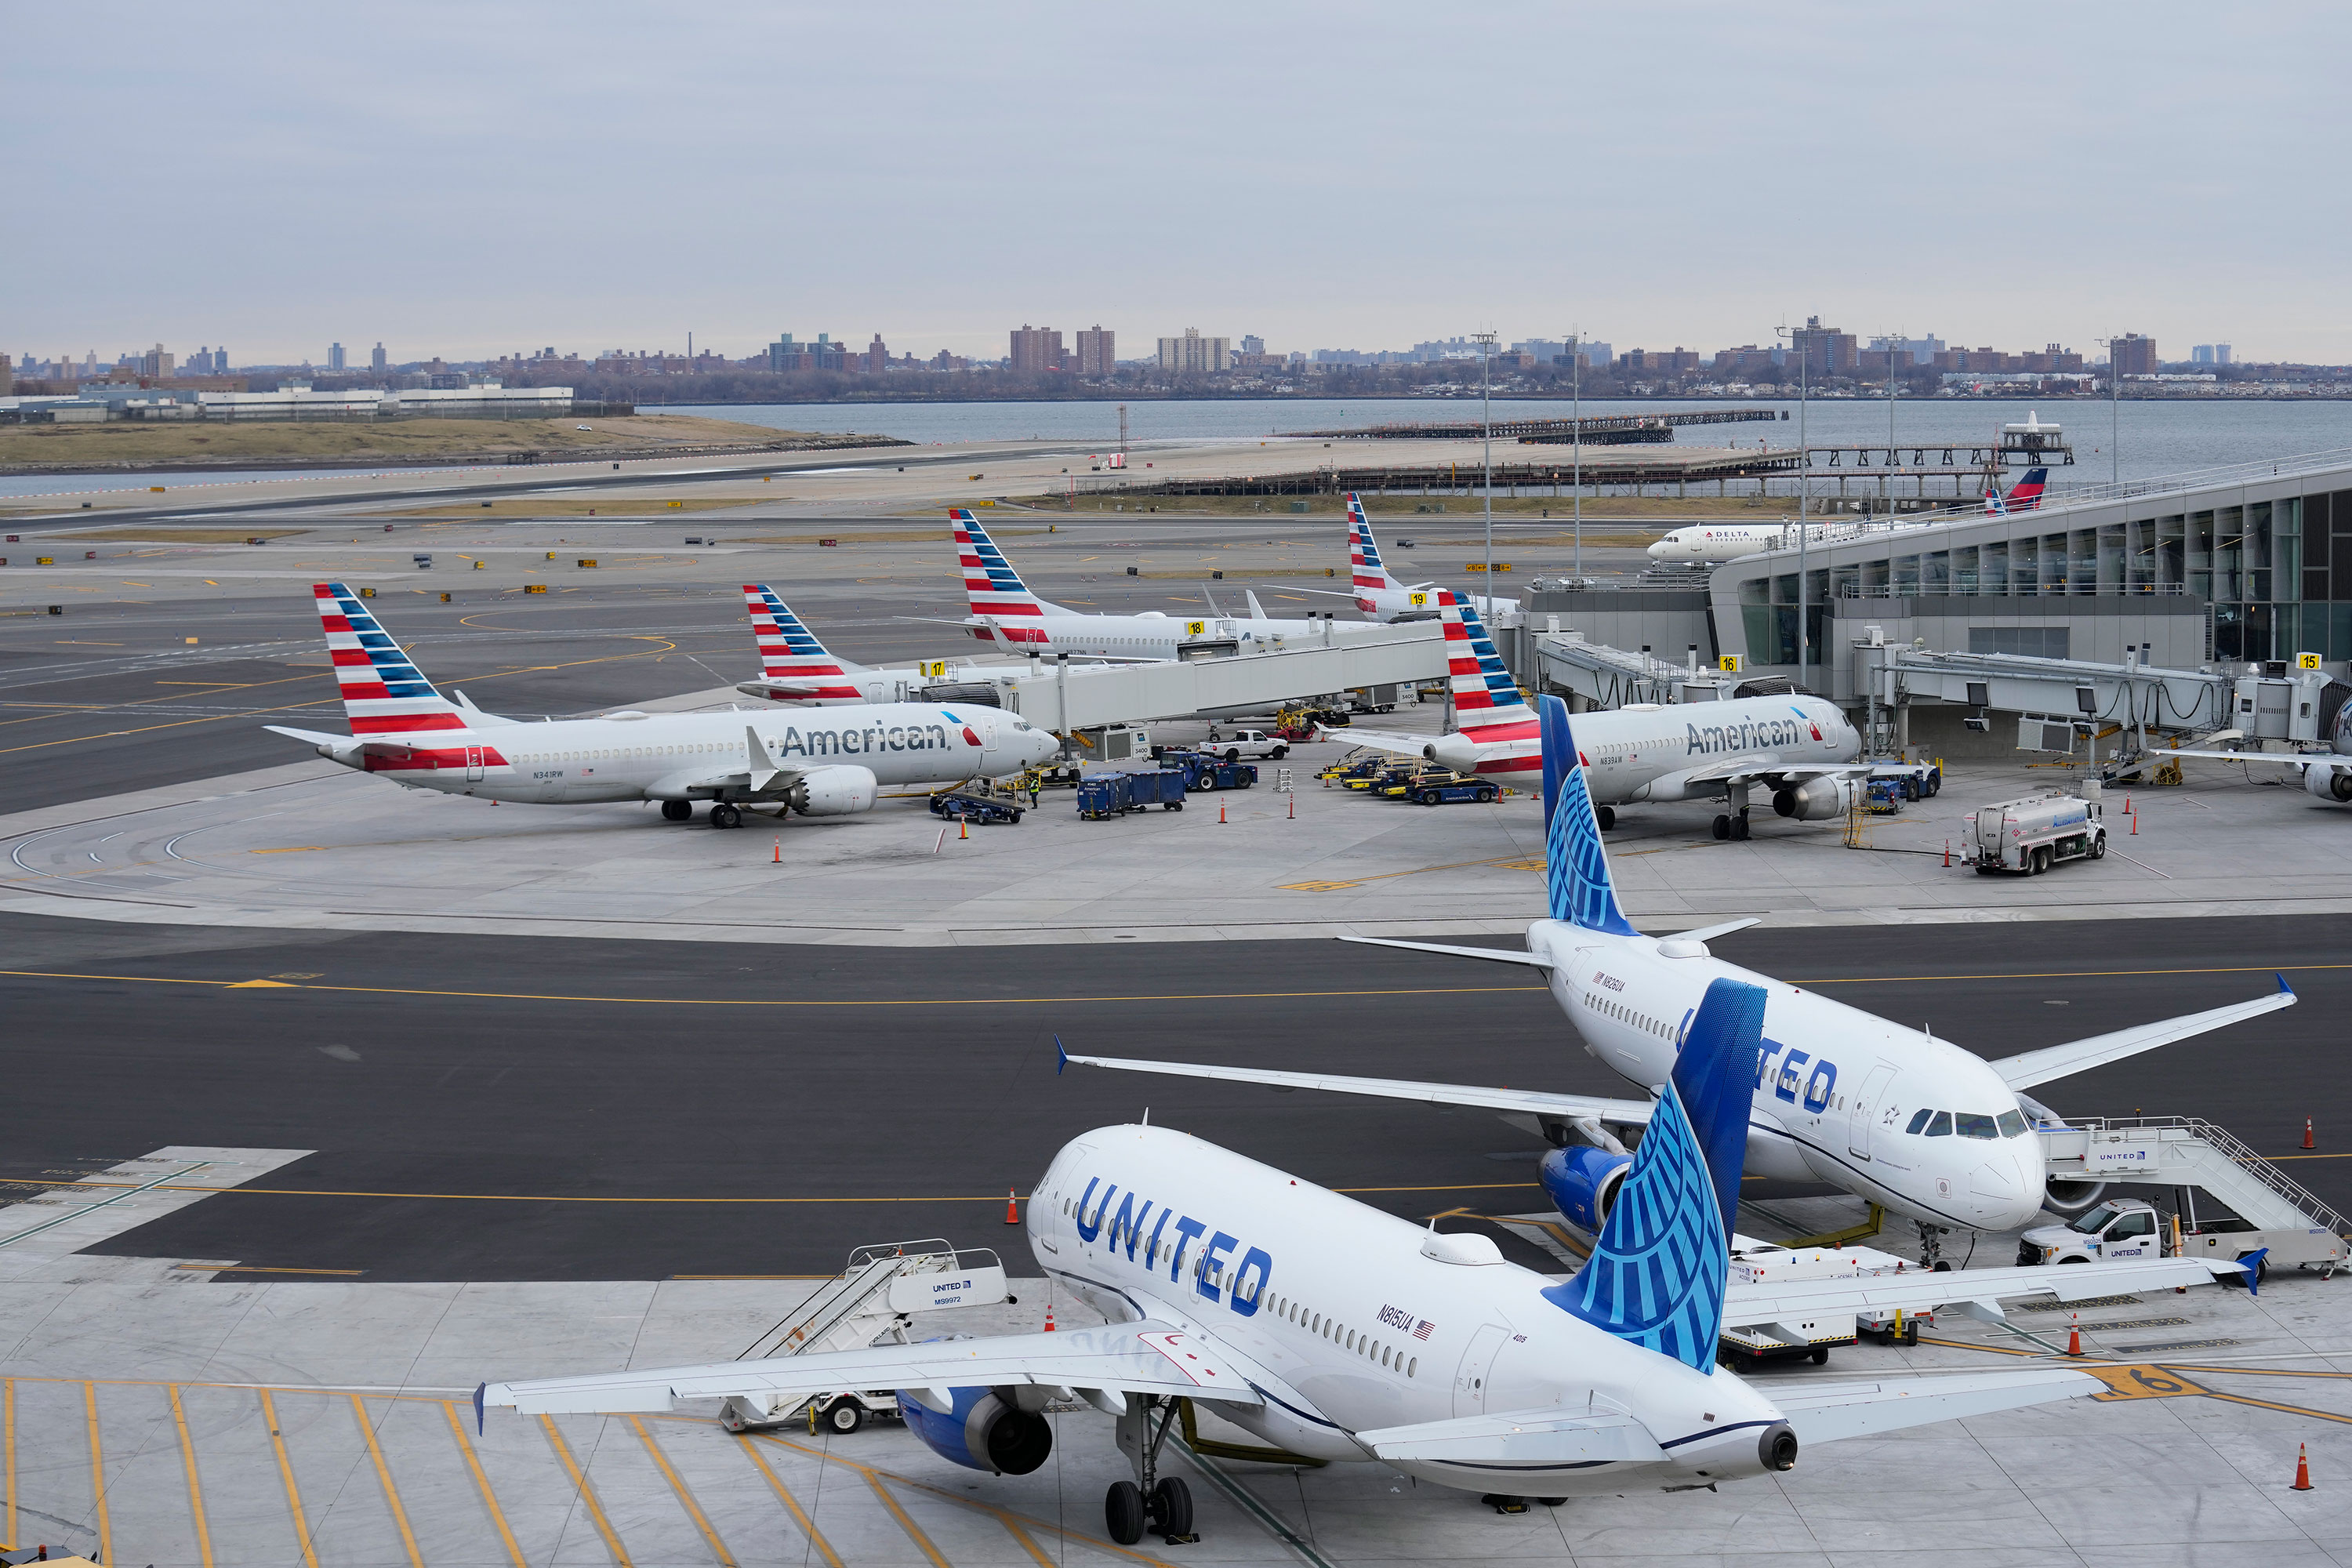 United Airlines and American Airlines jets sit on the tarmac at LaGuardia Airport in New York on Wednesday.